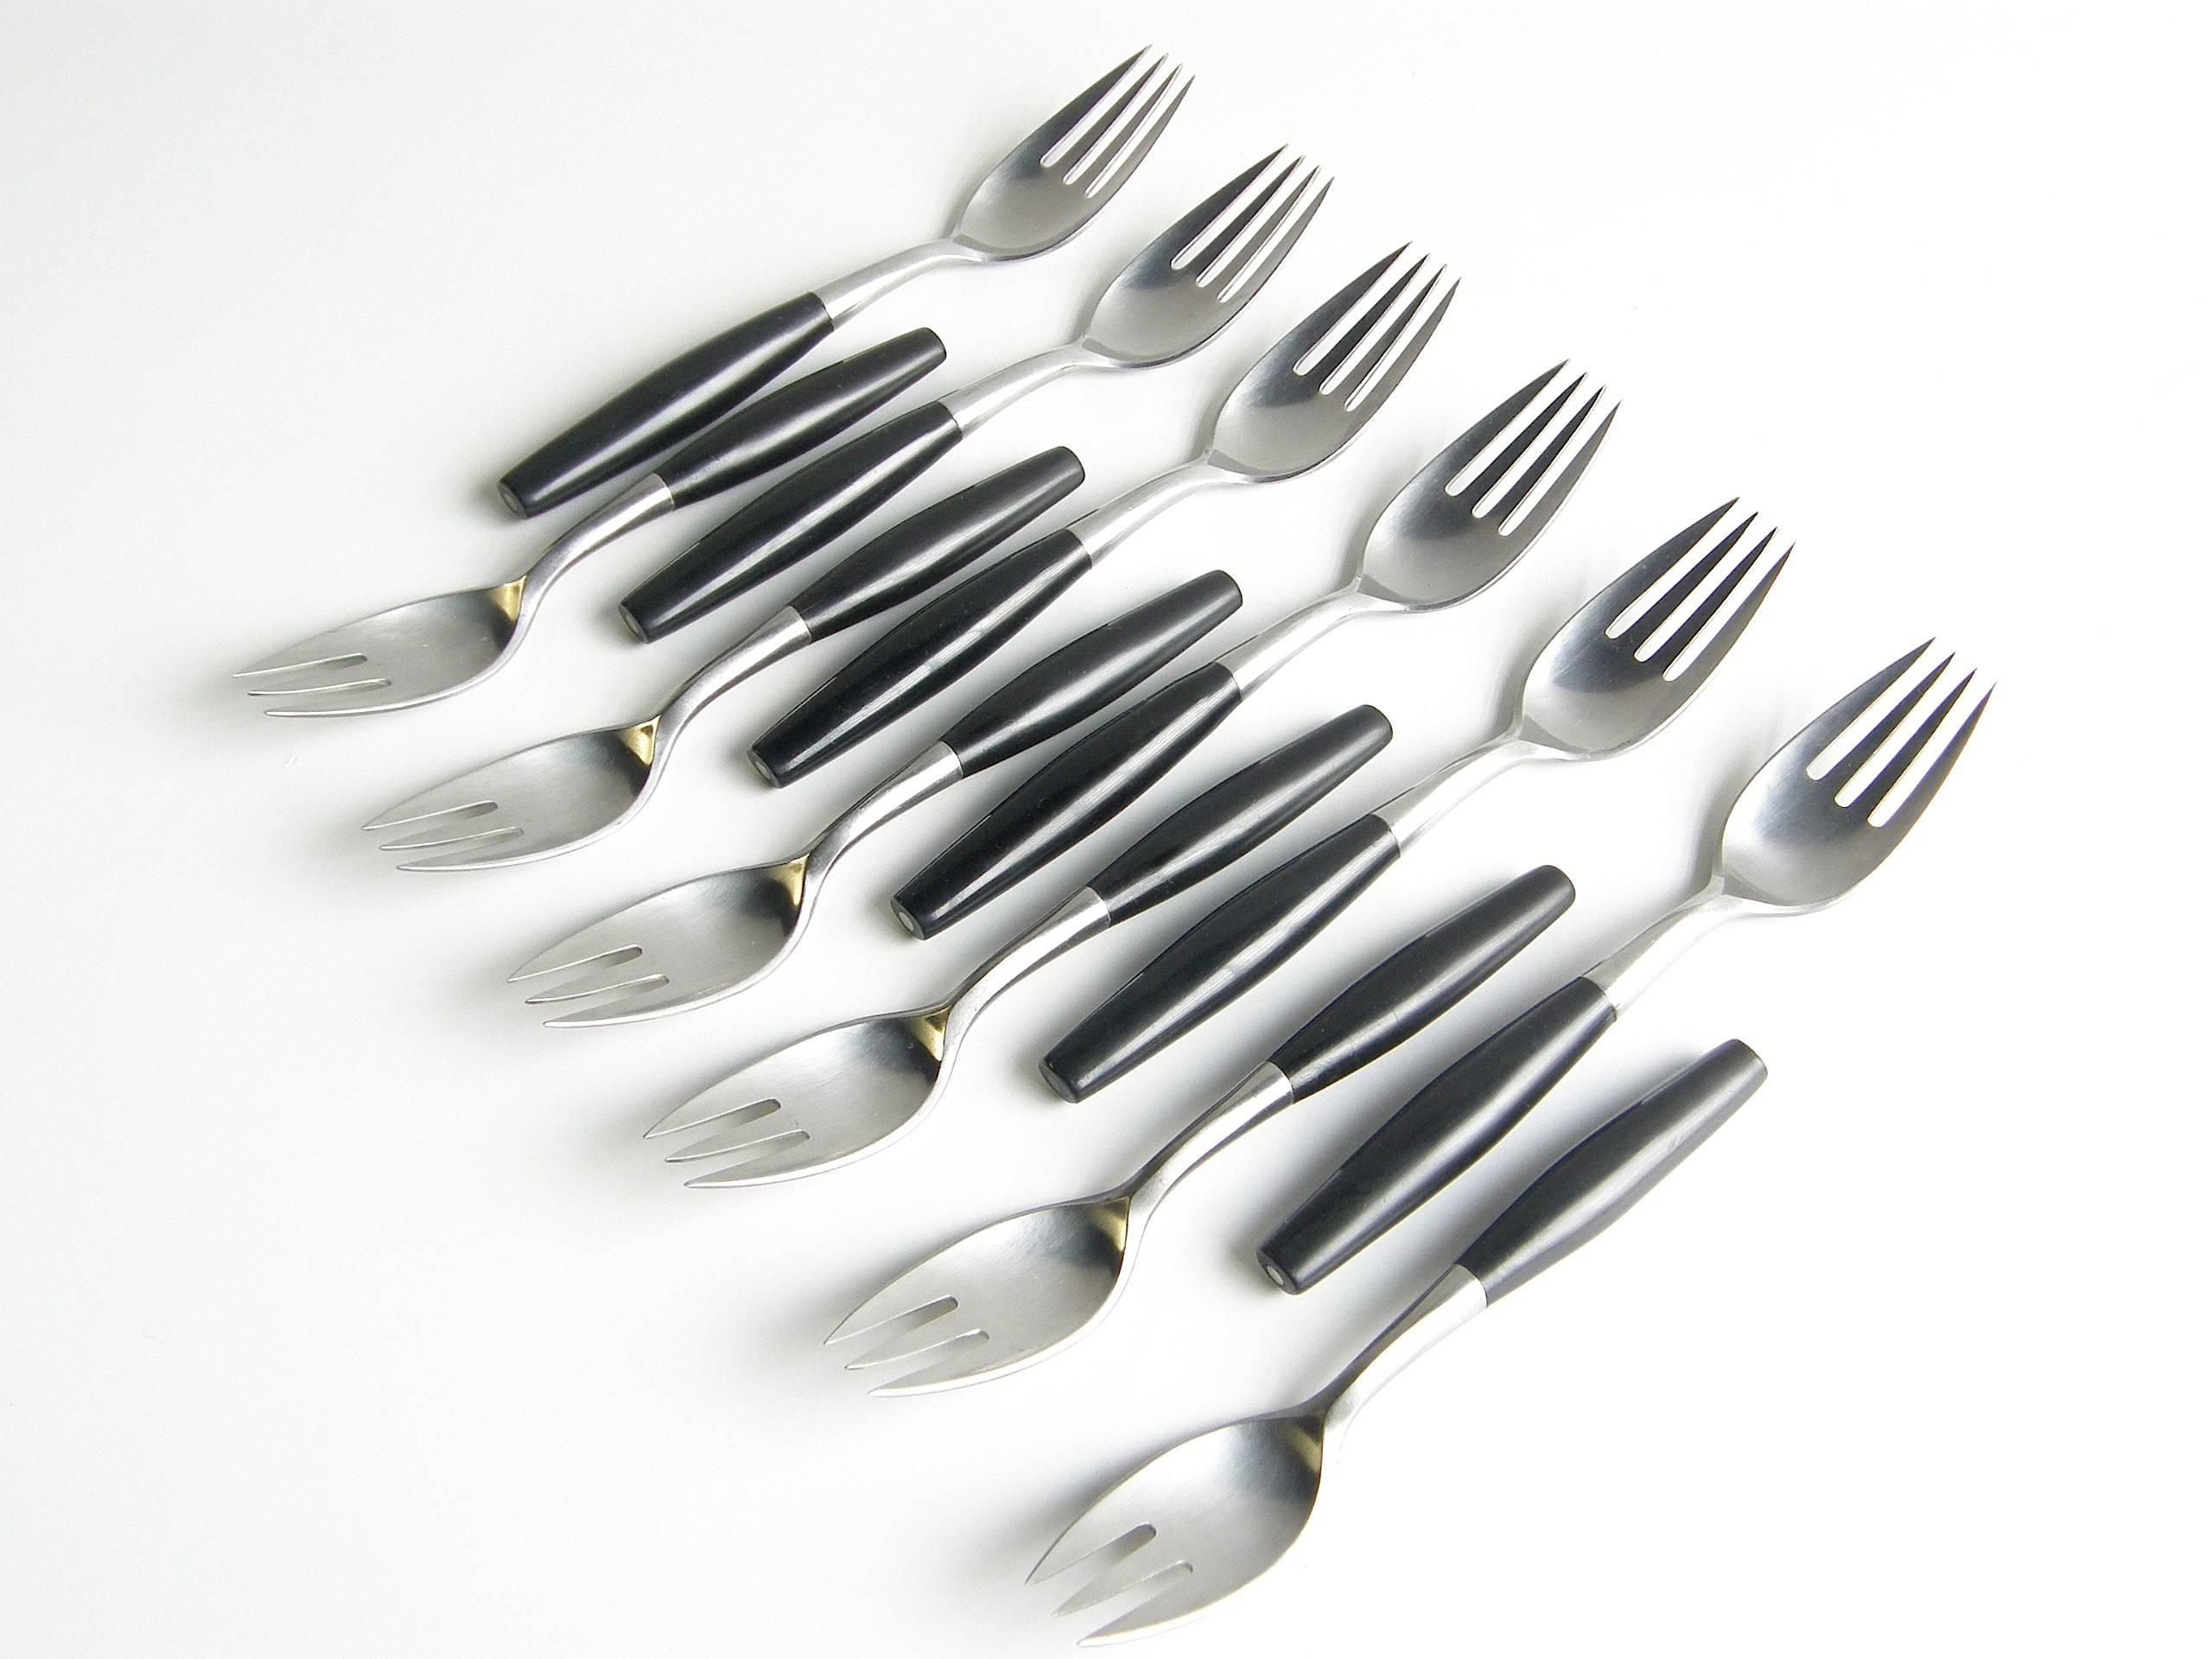 Service for six of "Kongo" flatware in stainless steel with nylon handles designed in 1954 by Jens Quistgaard for Dansk. This set is from an early production in Germany.

Six each salad fork, dinner fork, dinner knife, tea spoon, table